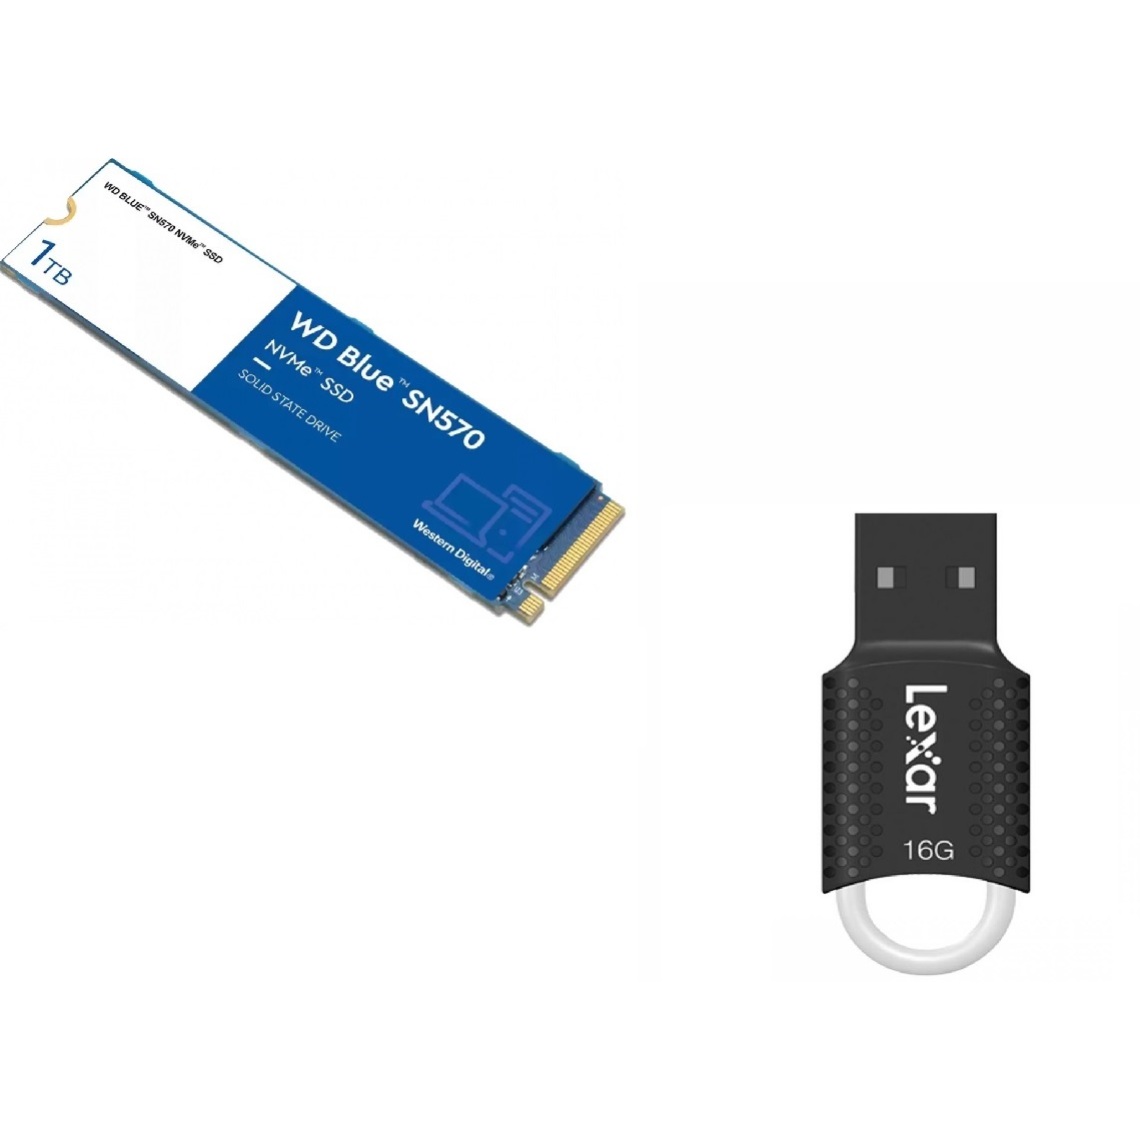 Western Digital - Disque SSD NVMe™ WD Blue SN570 1 To + Jump Drive V40 - 16 Go - SSD Interne